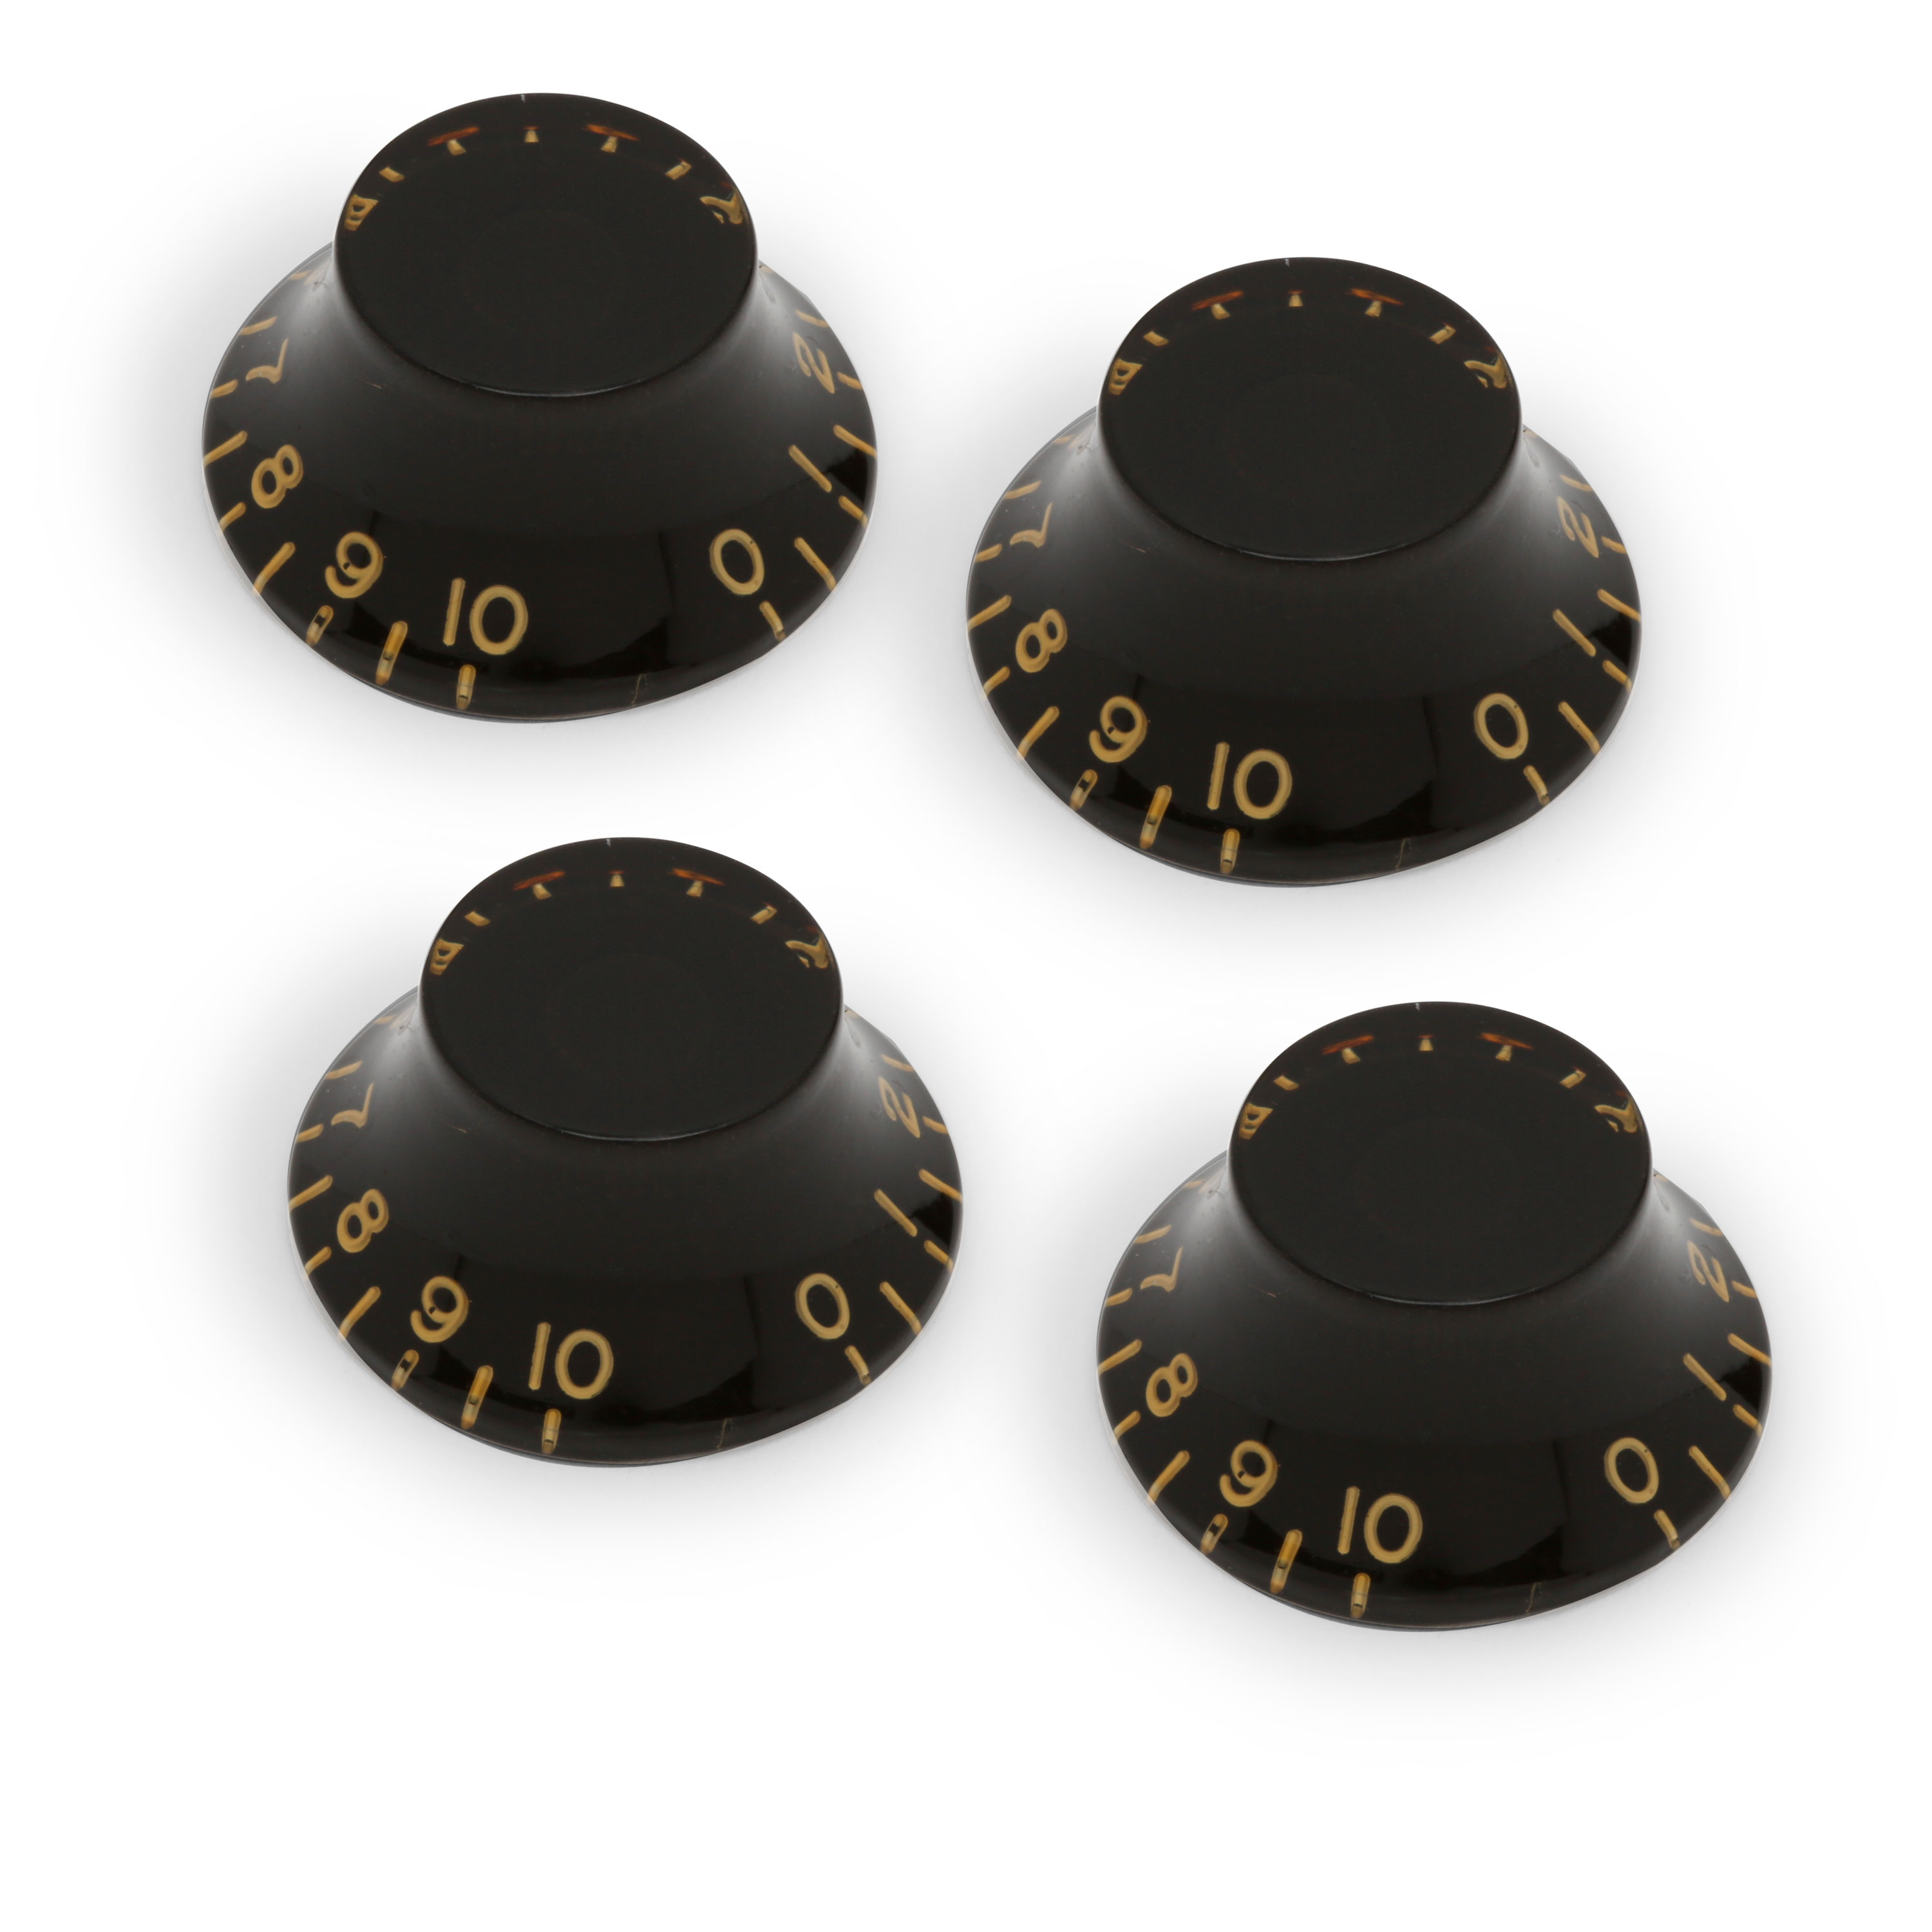  mxuteuk 4pcs Custom Bell Knobs Black w/Gold Custom Electric  Guitar Bass Top Hat Knobs Speed Volume Tone AMP Effect Pedal Control Knobs  KNOB-S24 : Musical Instruments